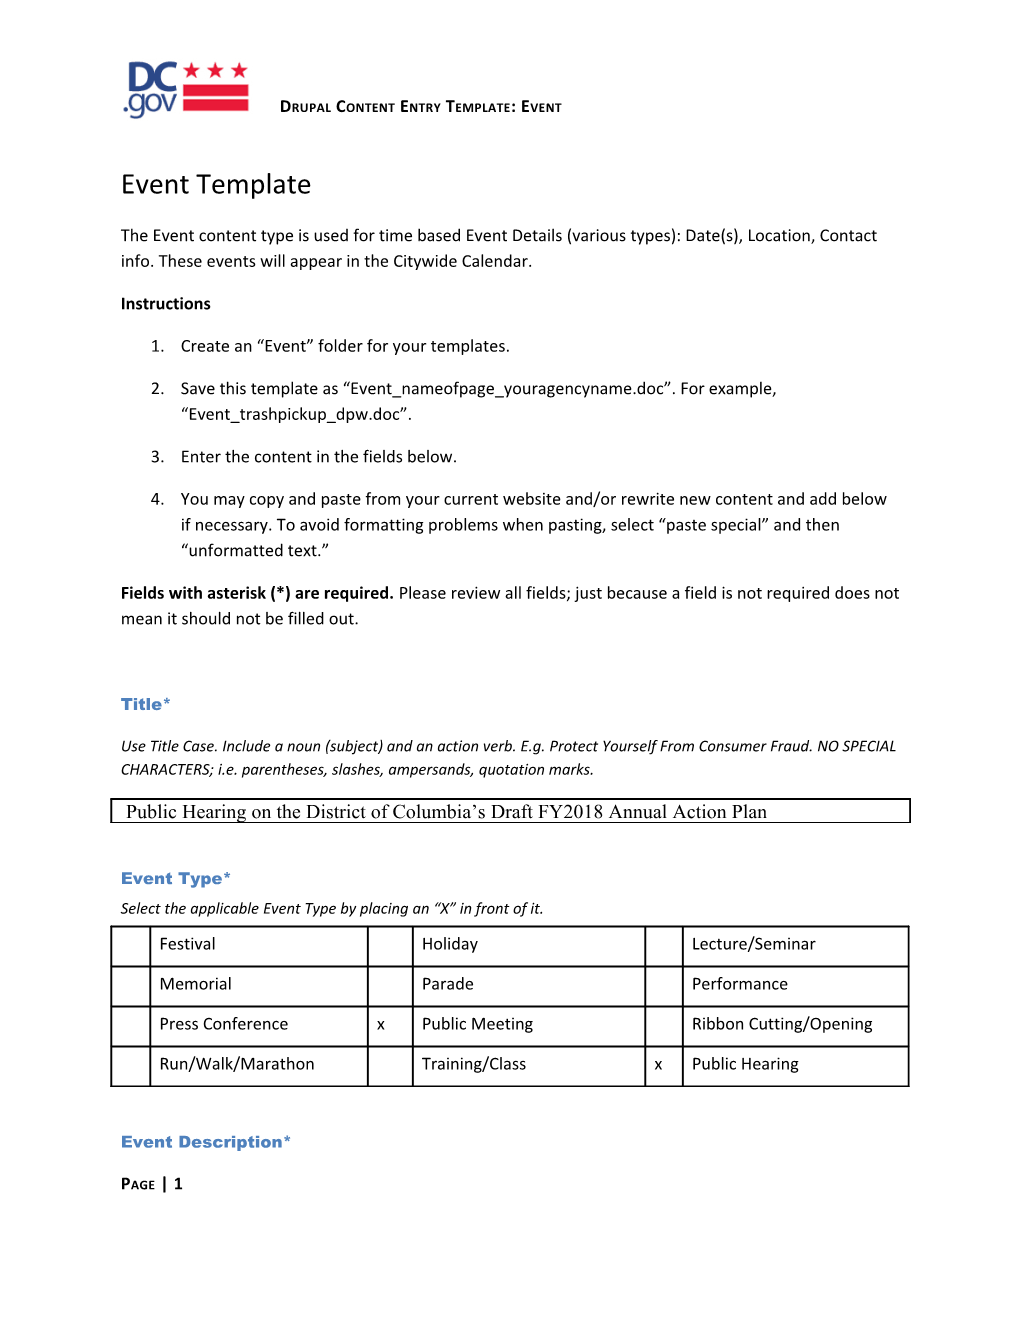 Content Entry Template: Event